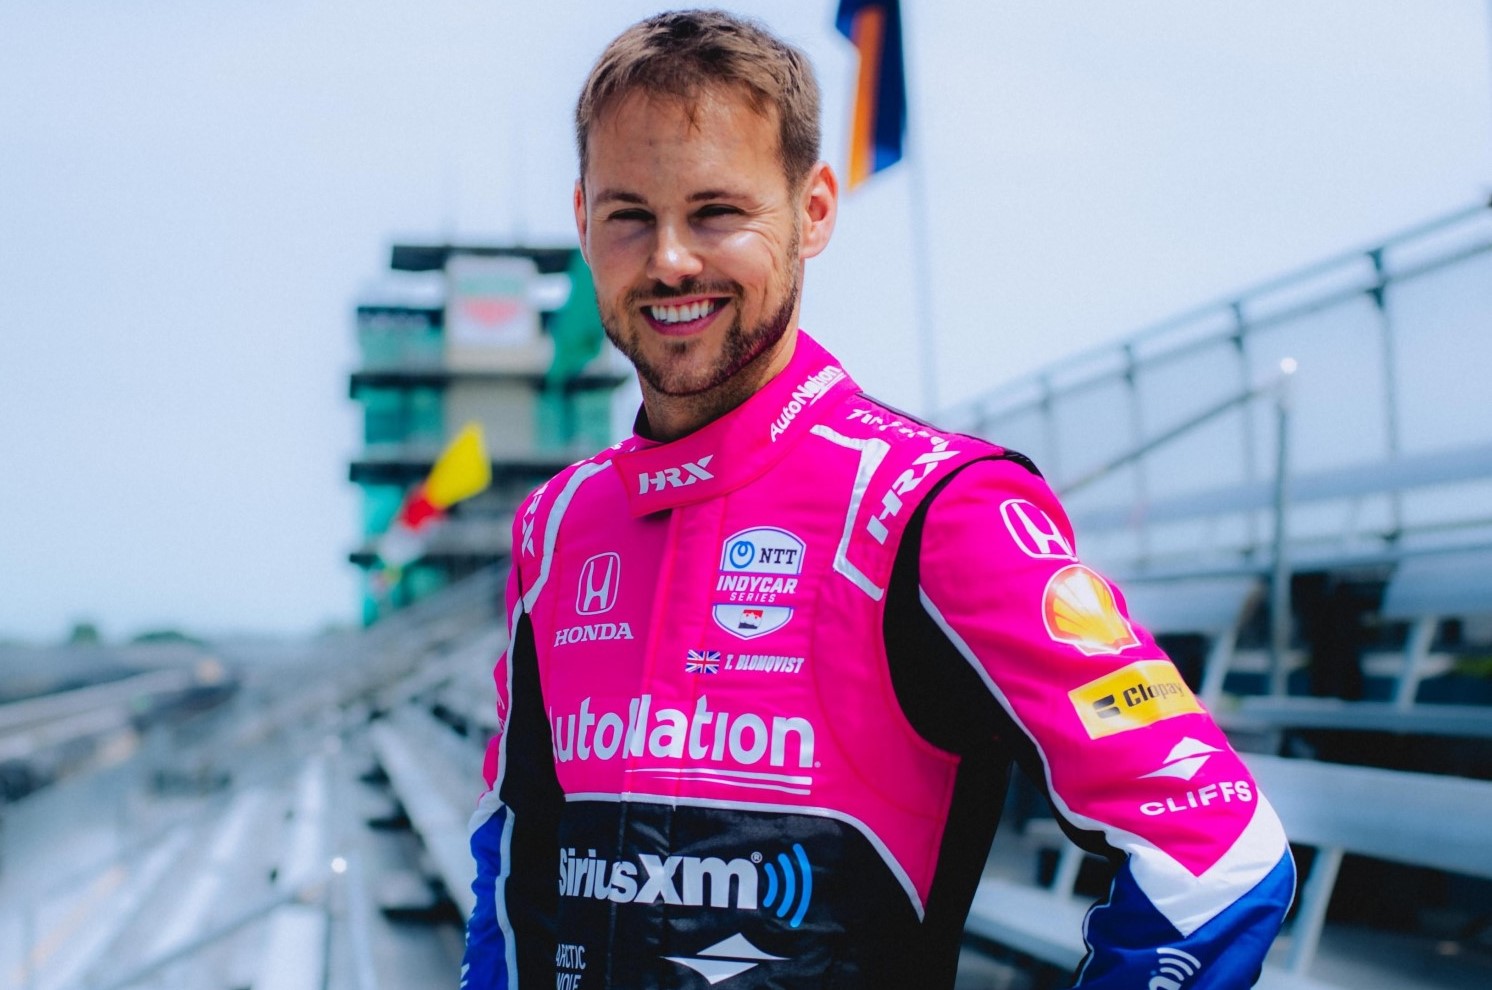 Meyer Shank confirms Blomqvist to replace Pagenaud towards end of the season